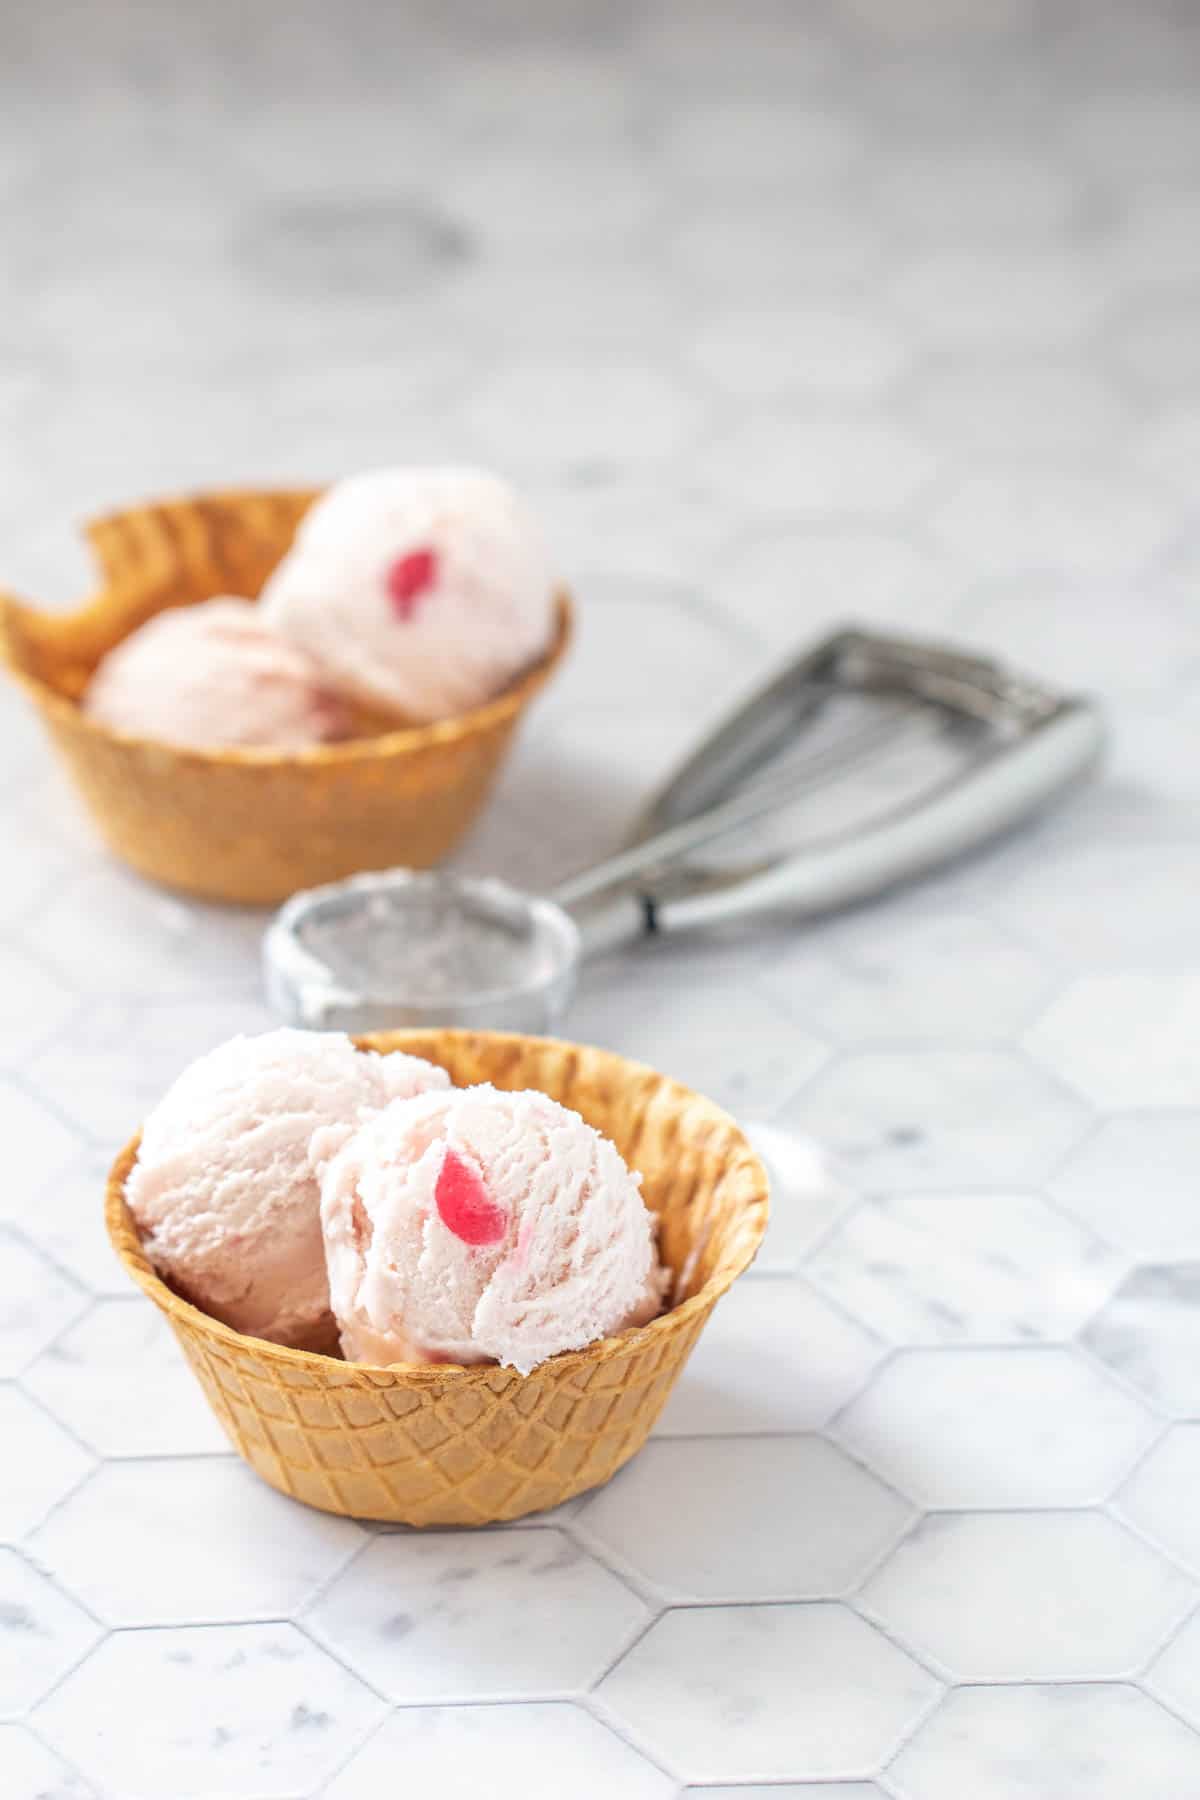 Two waffle bowls of pink and white scooped ice cream, each topped with a cherry piece. An ice cream scoop is placed between the two bowls on a marbled surface.